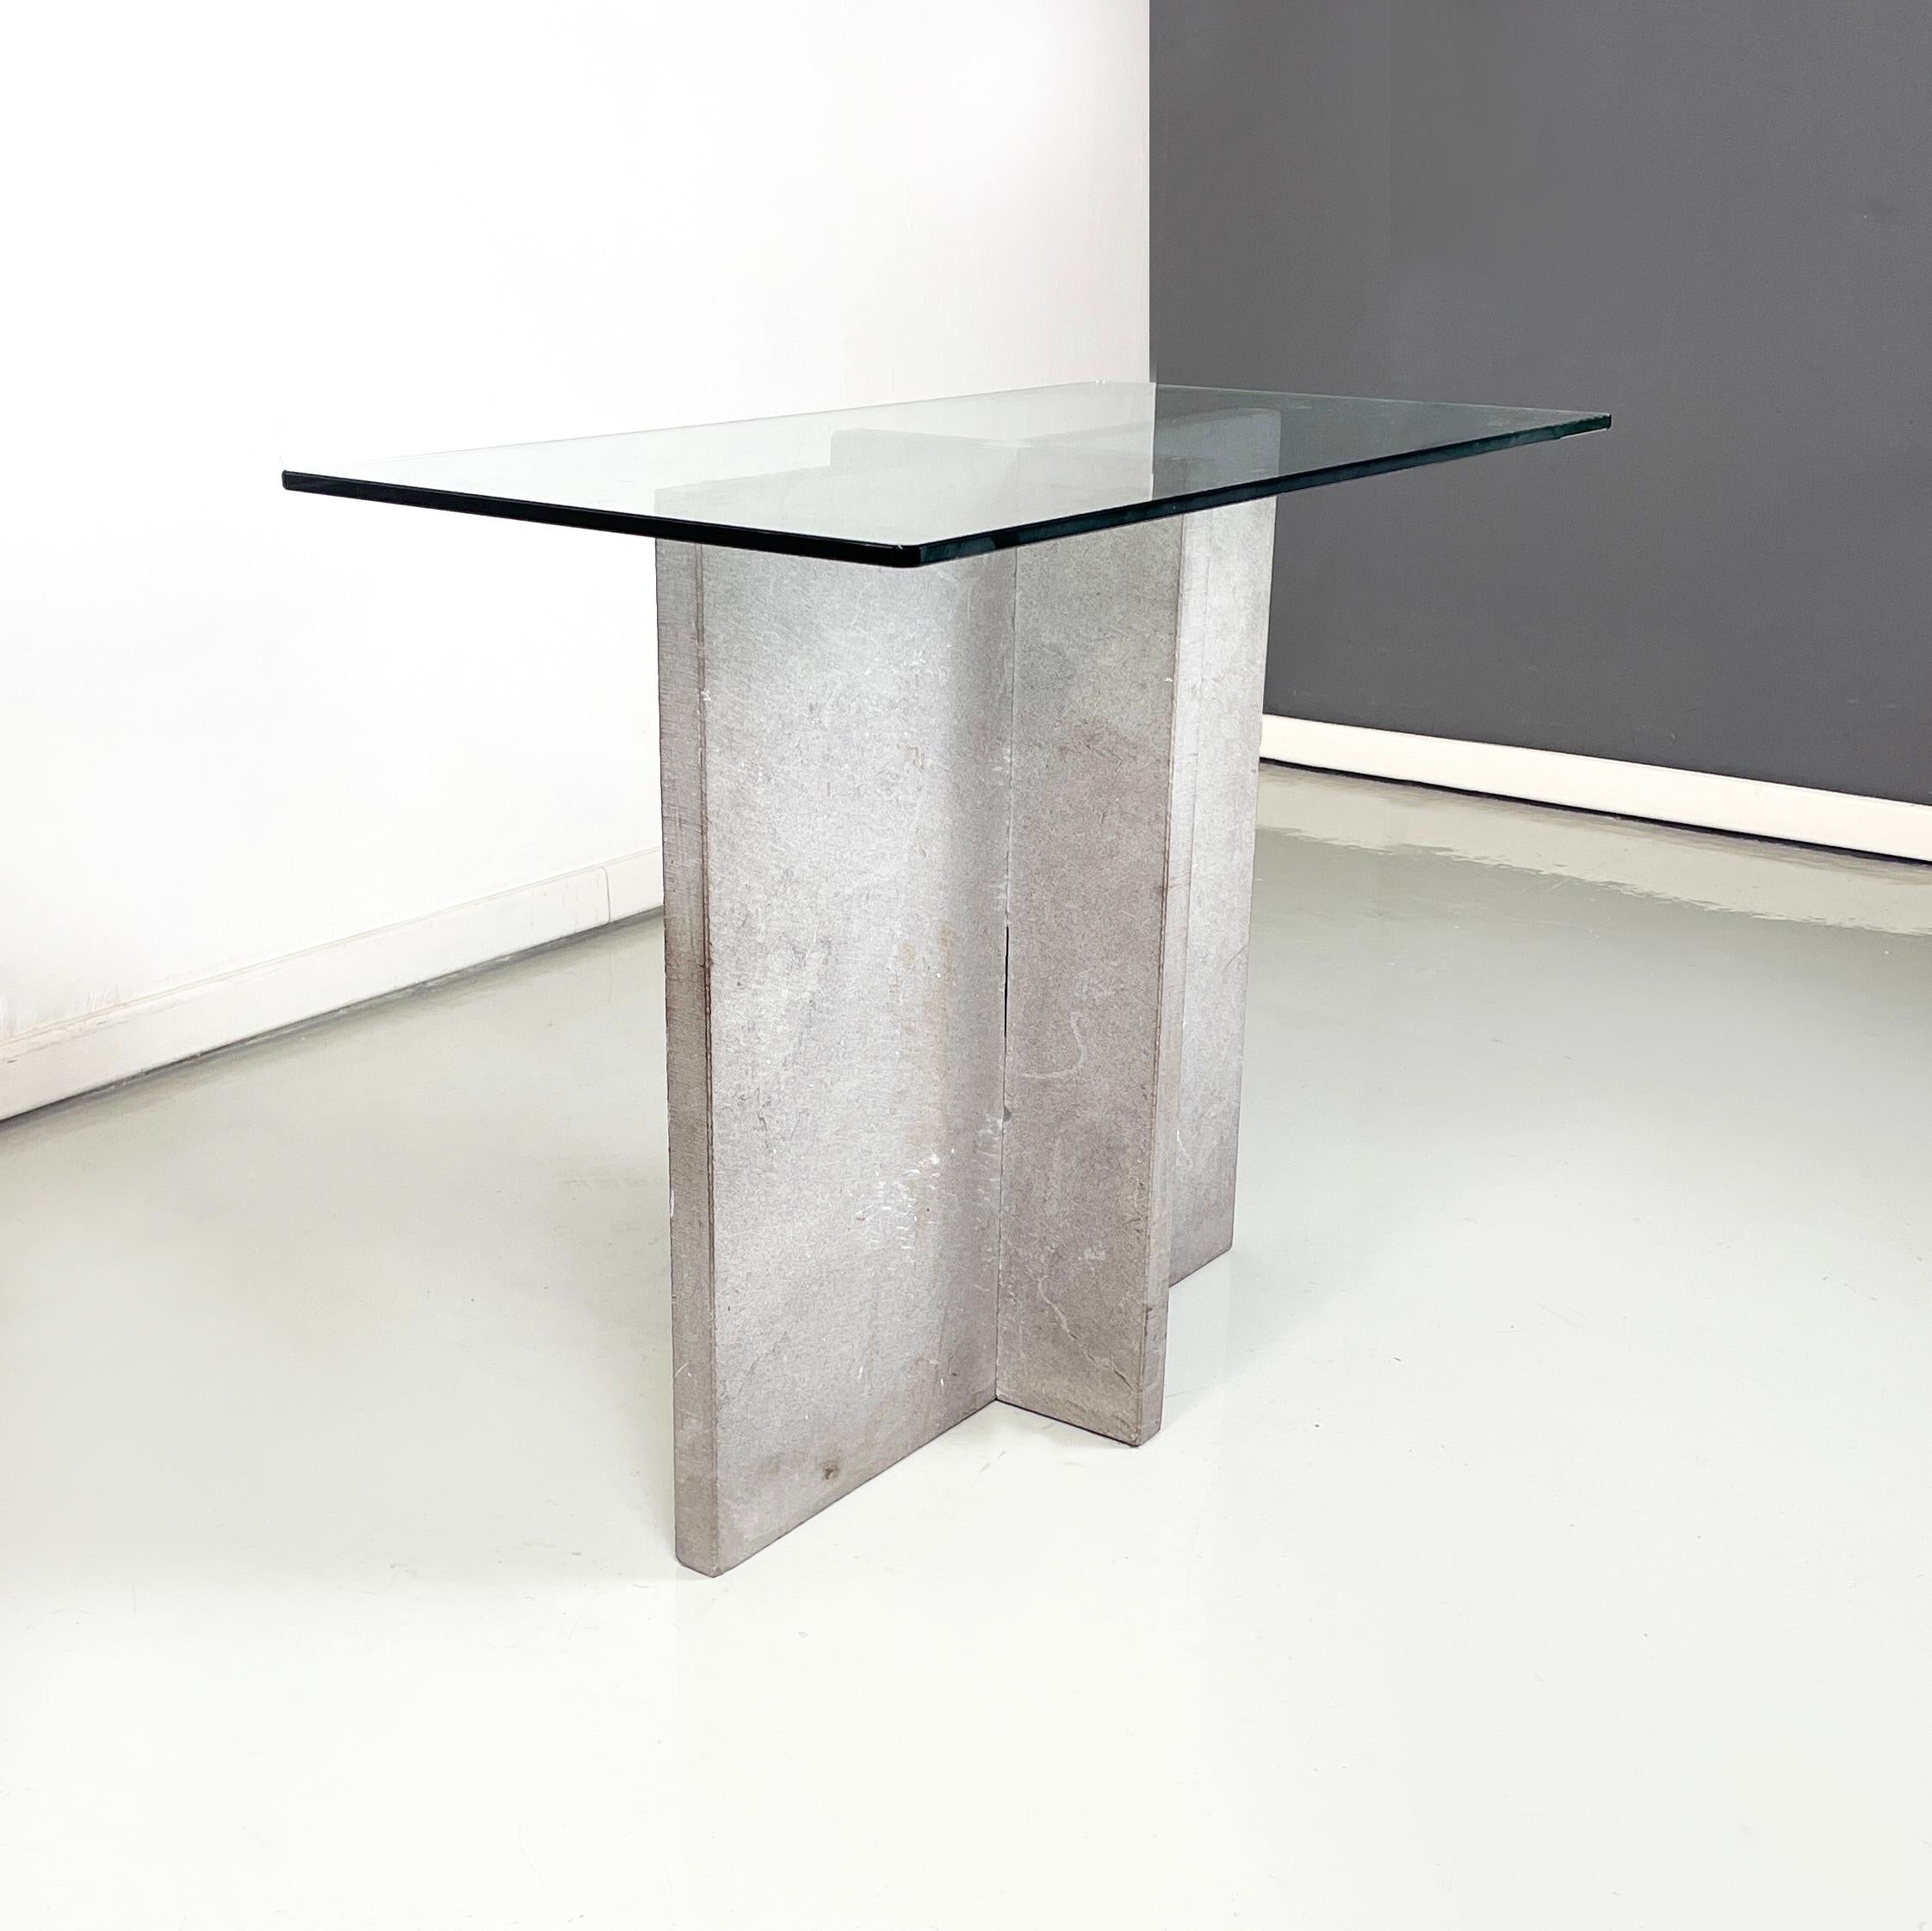 Italian modern rectangular Console in glass and cement, 1980s
Console table with rectangular top with rounded glass corners. The base is made up of two interlocking cement slabs, which form a cross.
1980 approx.
Good condition, the glass and